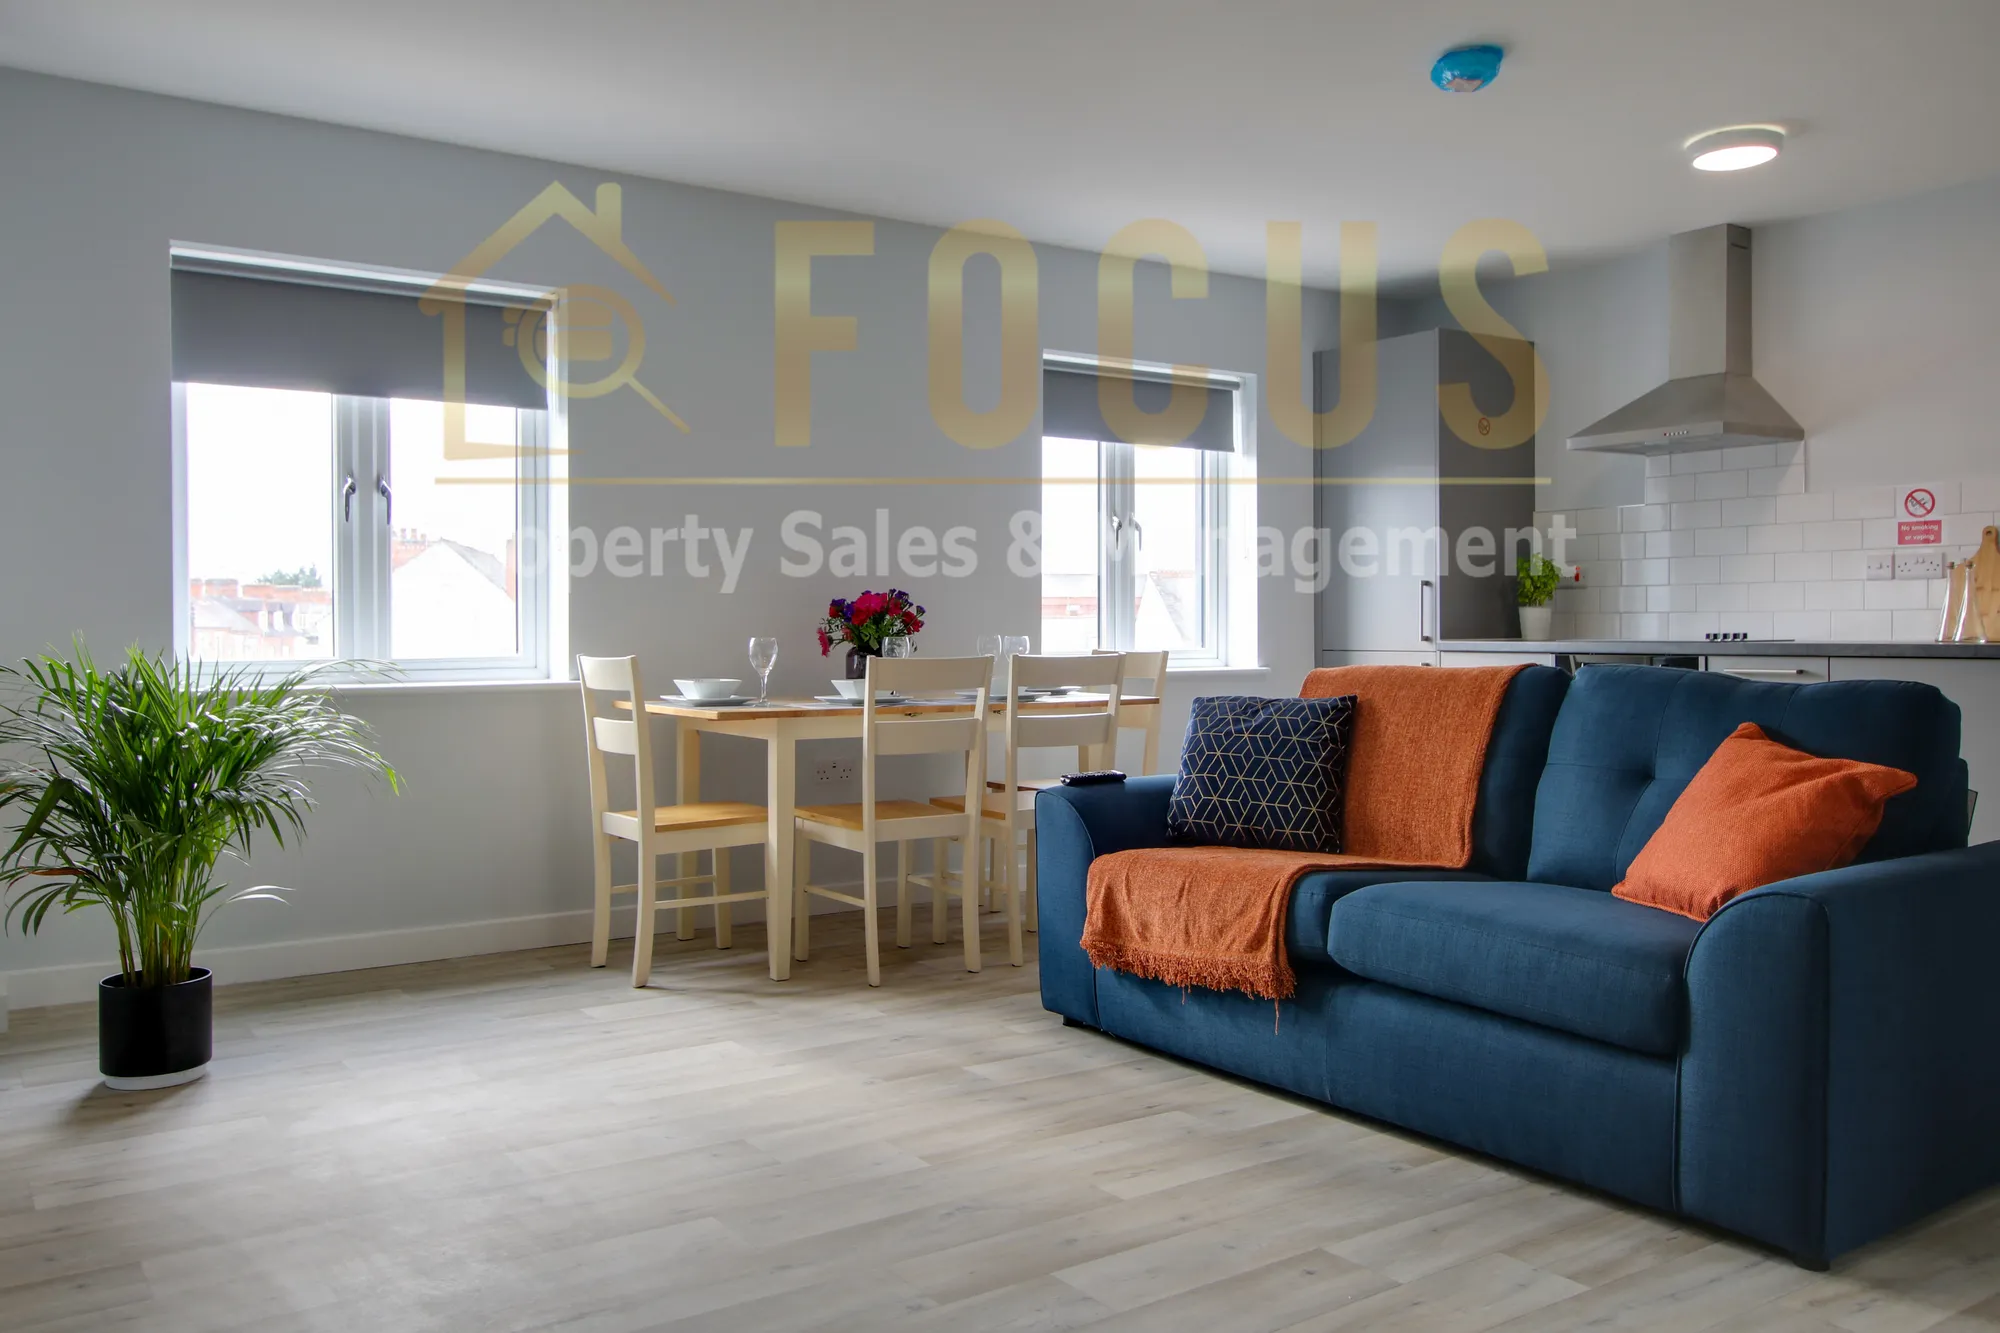 1 bed flat to rent in Houlditch Road, Leicester - Property Image 1